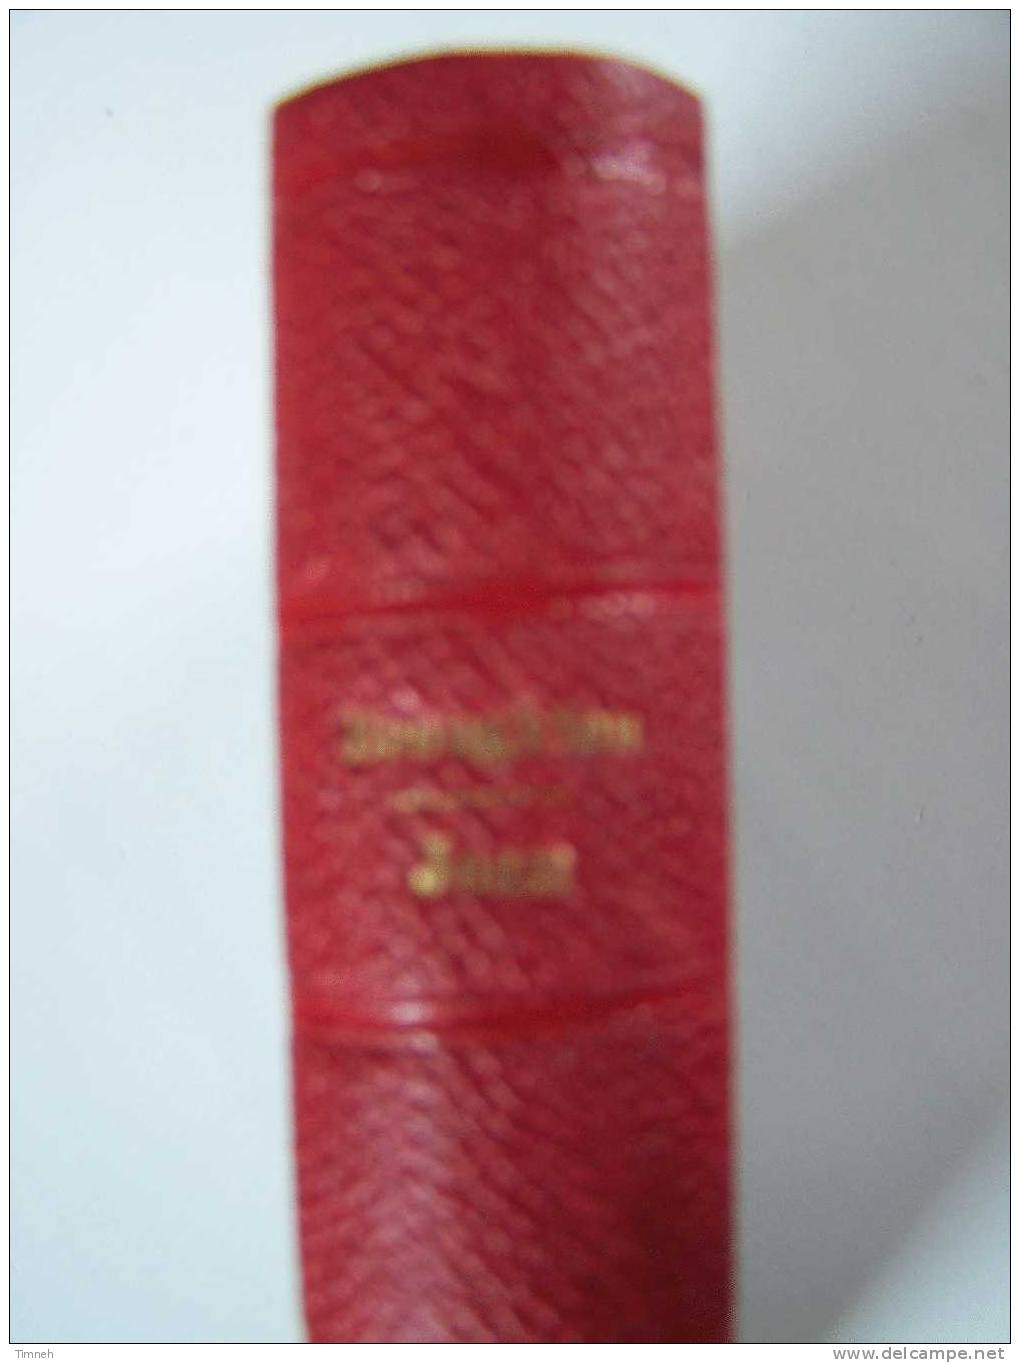 JOAN-by  Rhoda Broughton-vol.N°1627-1876-EDITION TAUSCHNITZ LEIPZIG-COLLECTION BRITISH AUTHORS - 1850-1899